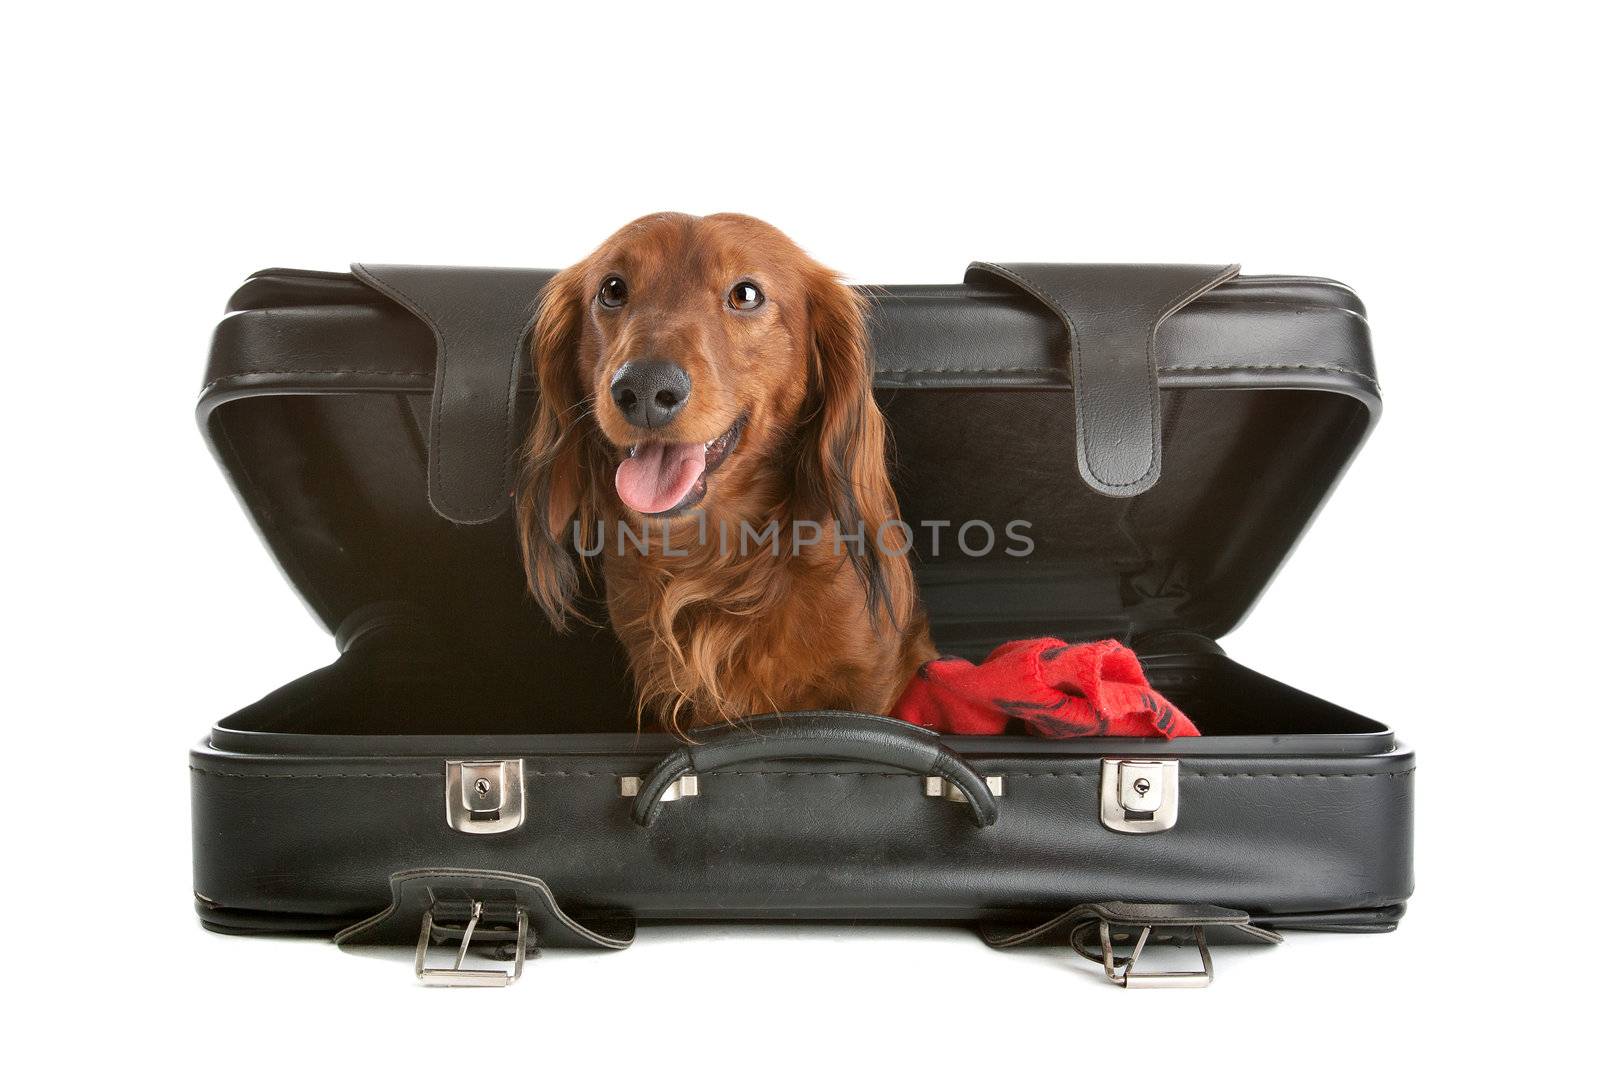 Dog in suitcase by eriklam